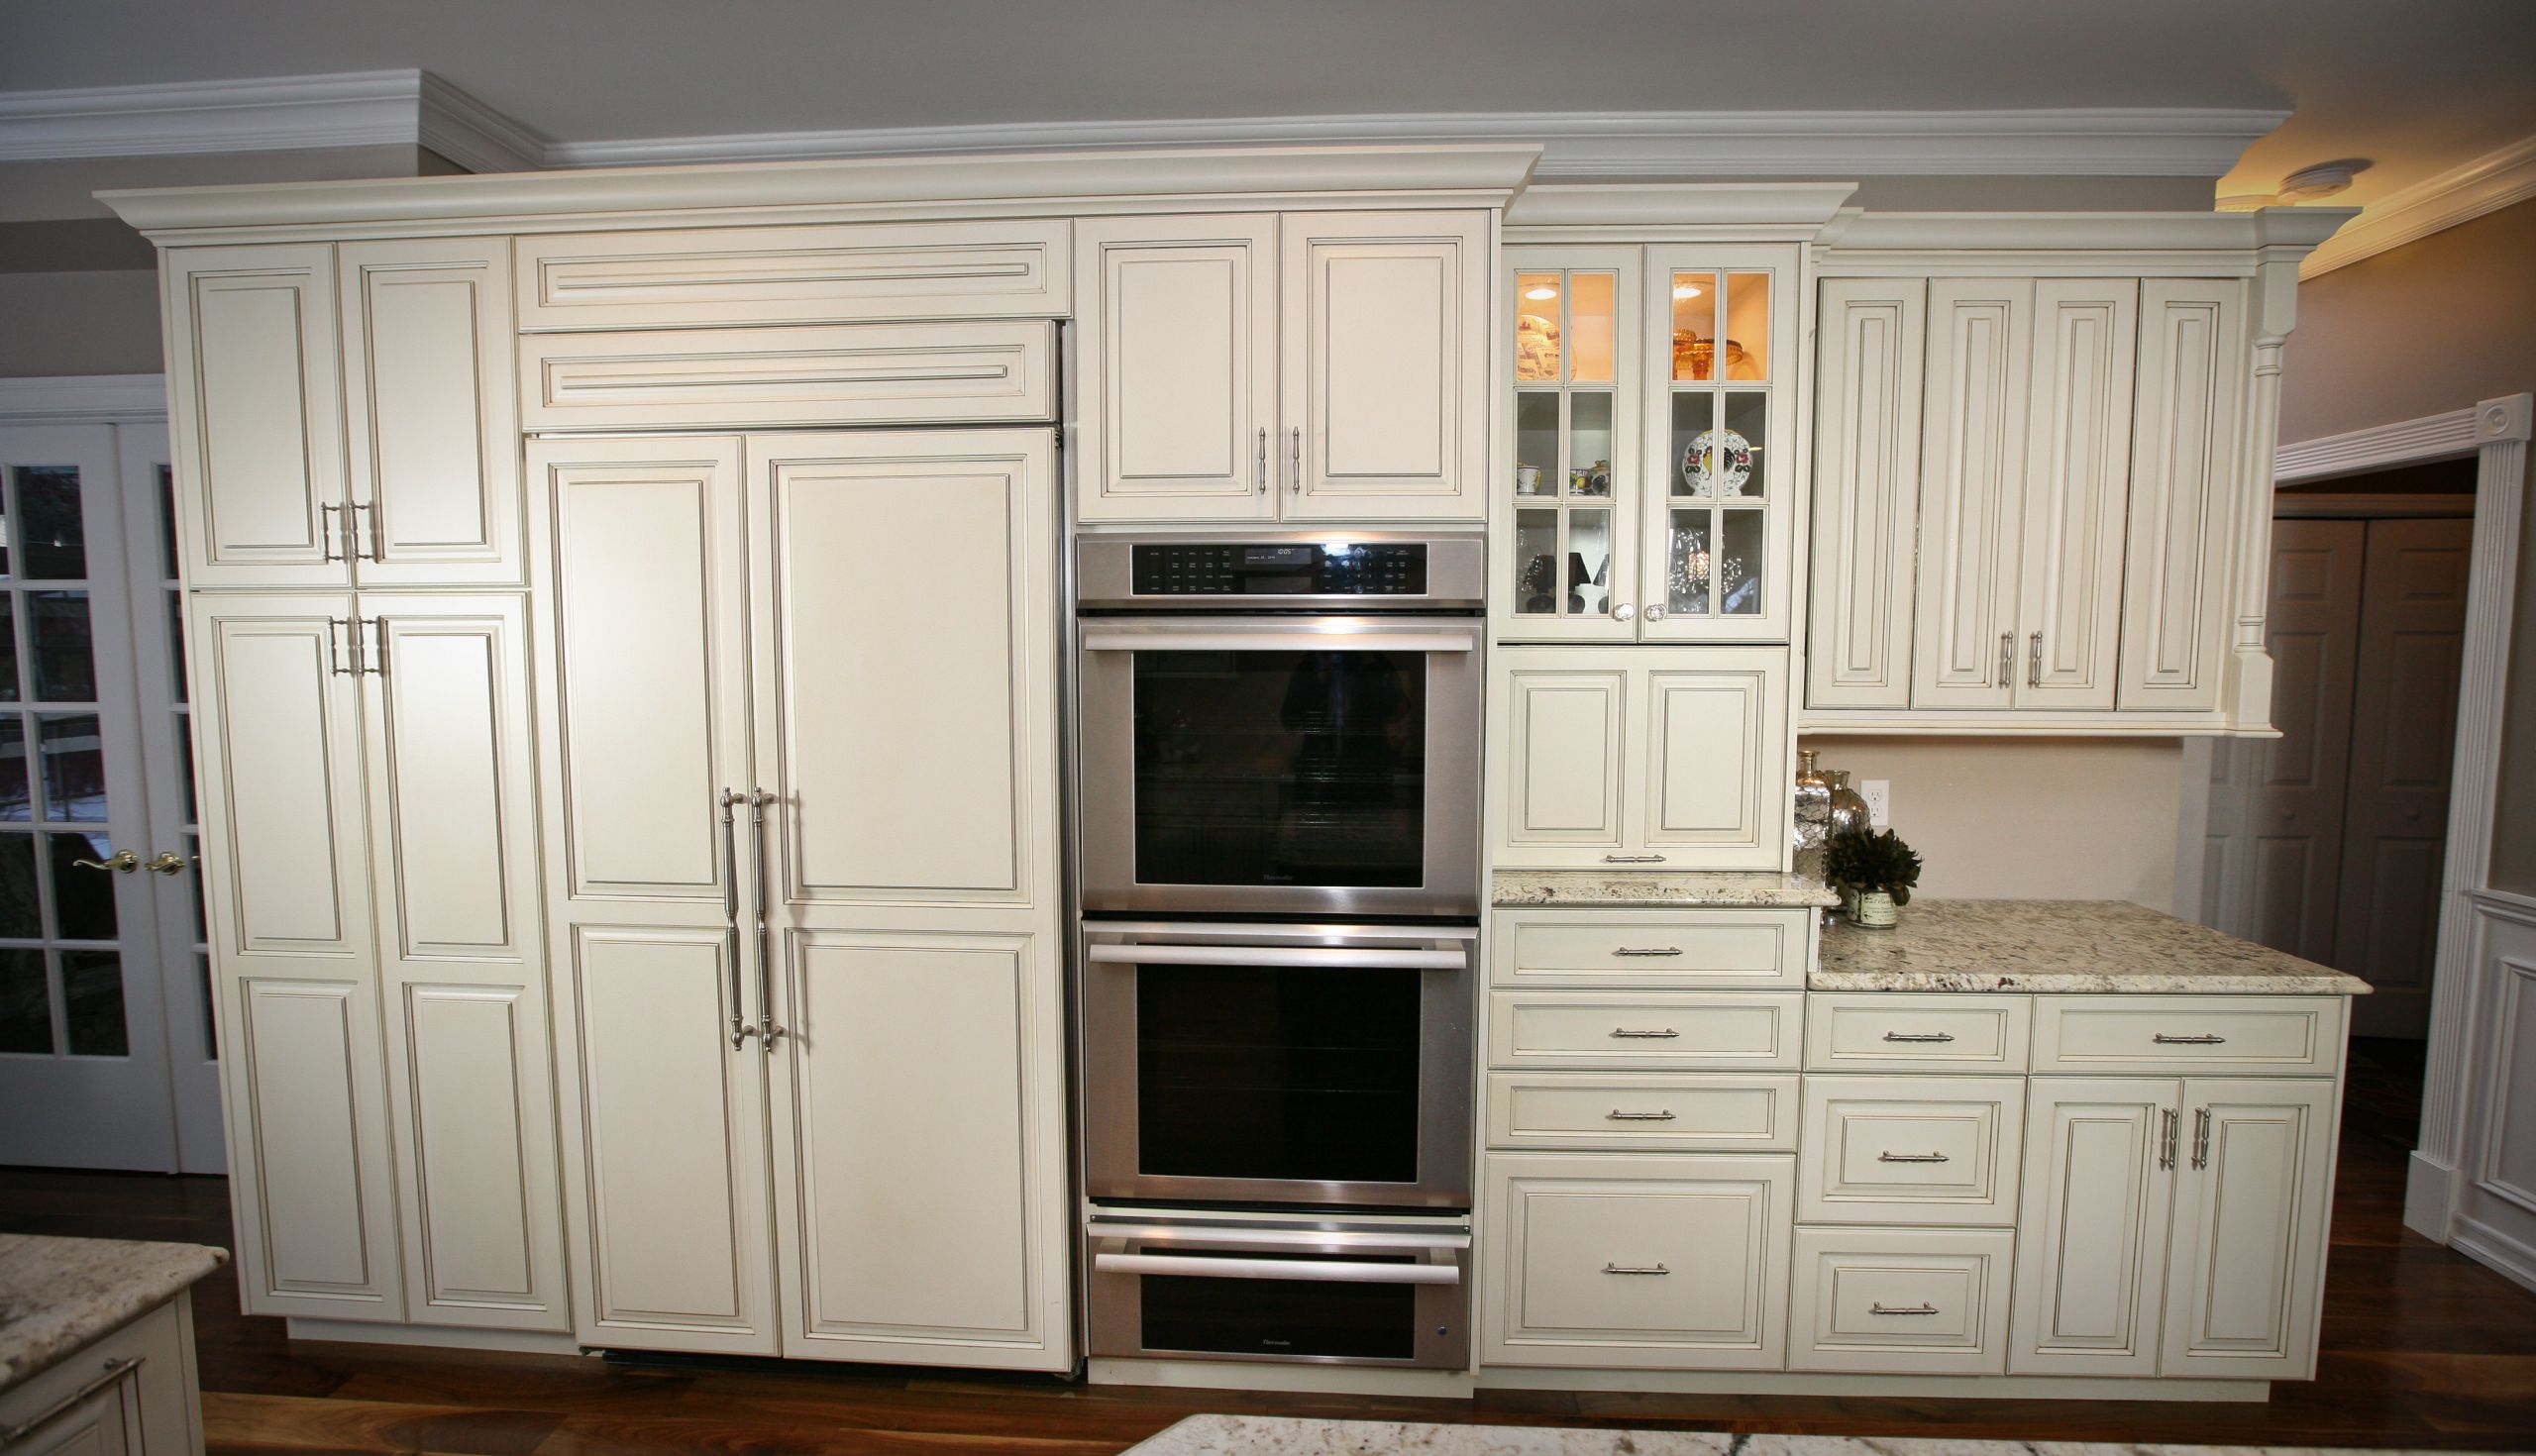 Wall Cabinet Kitchen
 Perfect Balance Kitchen Wall New Jersey by Design Line